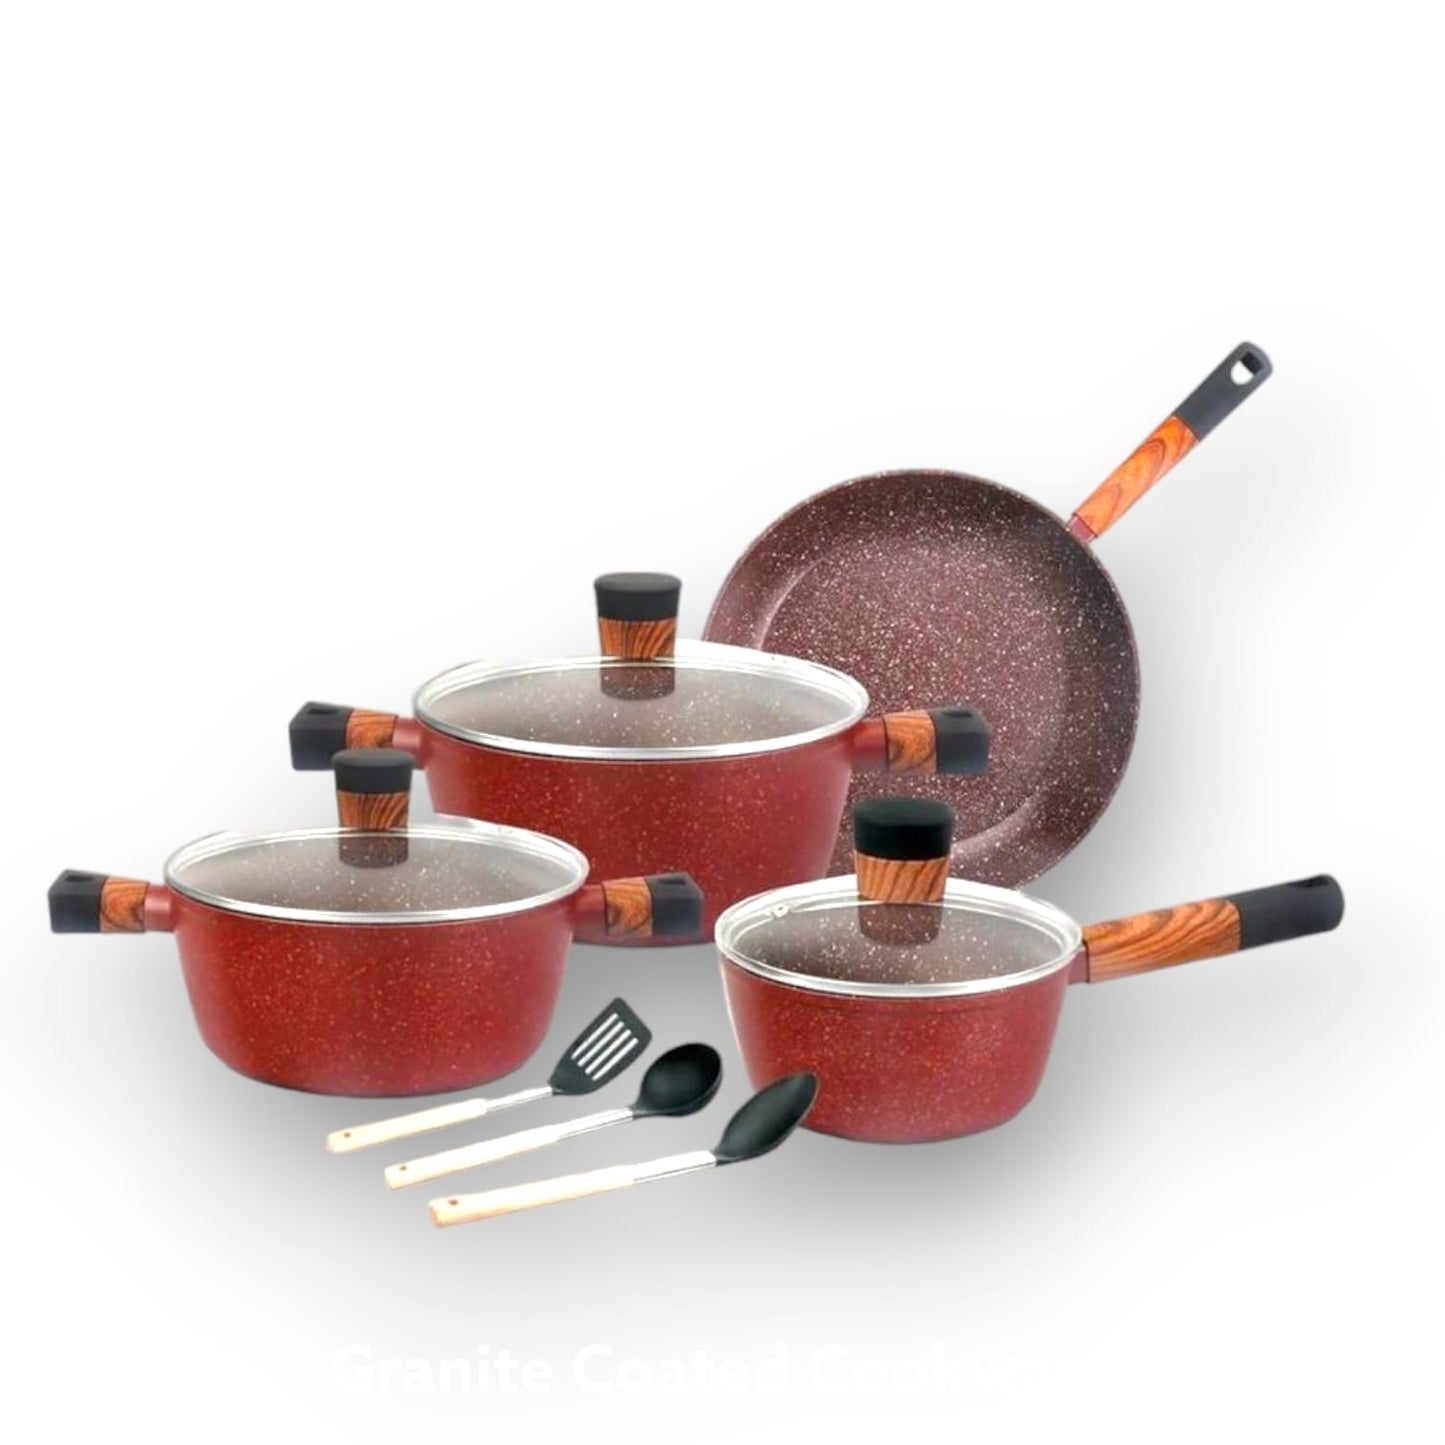 <p data-mce-fragment="1">This 10-piece cookware set, featuring a durable granite coating, is perfect for all your cooking needs. Experience superior heat conduction and distribution for even cooking, and its non-stick surface makes for easy cleaning. Upgrade your kitchen with this versatile and stylish set.</p>